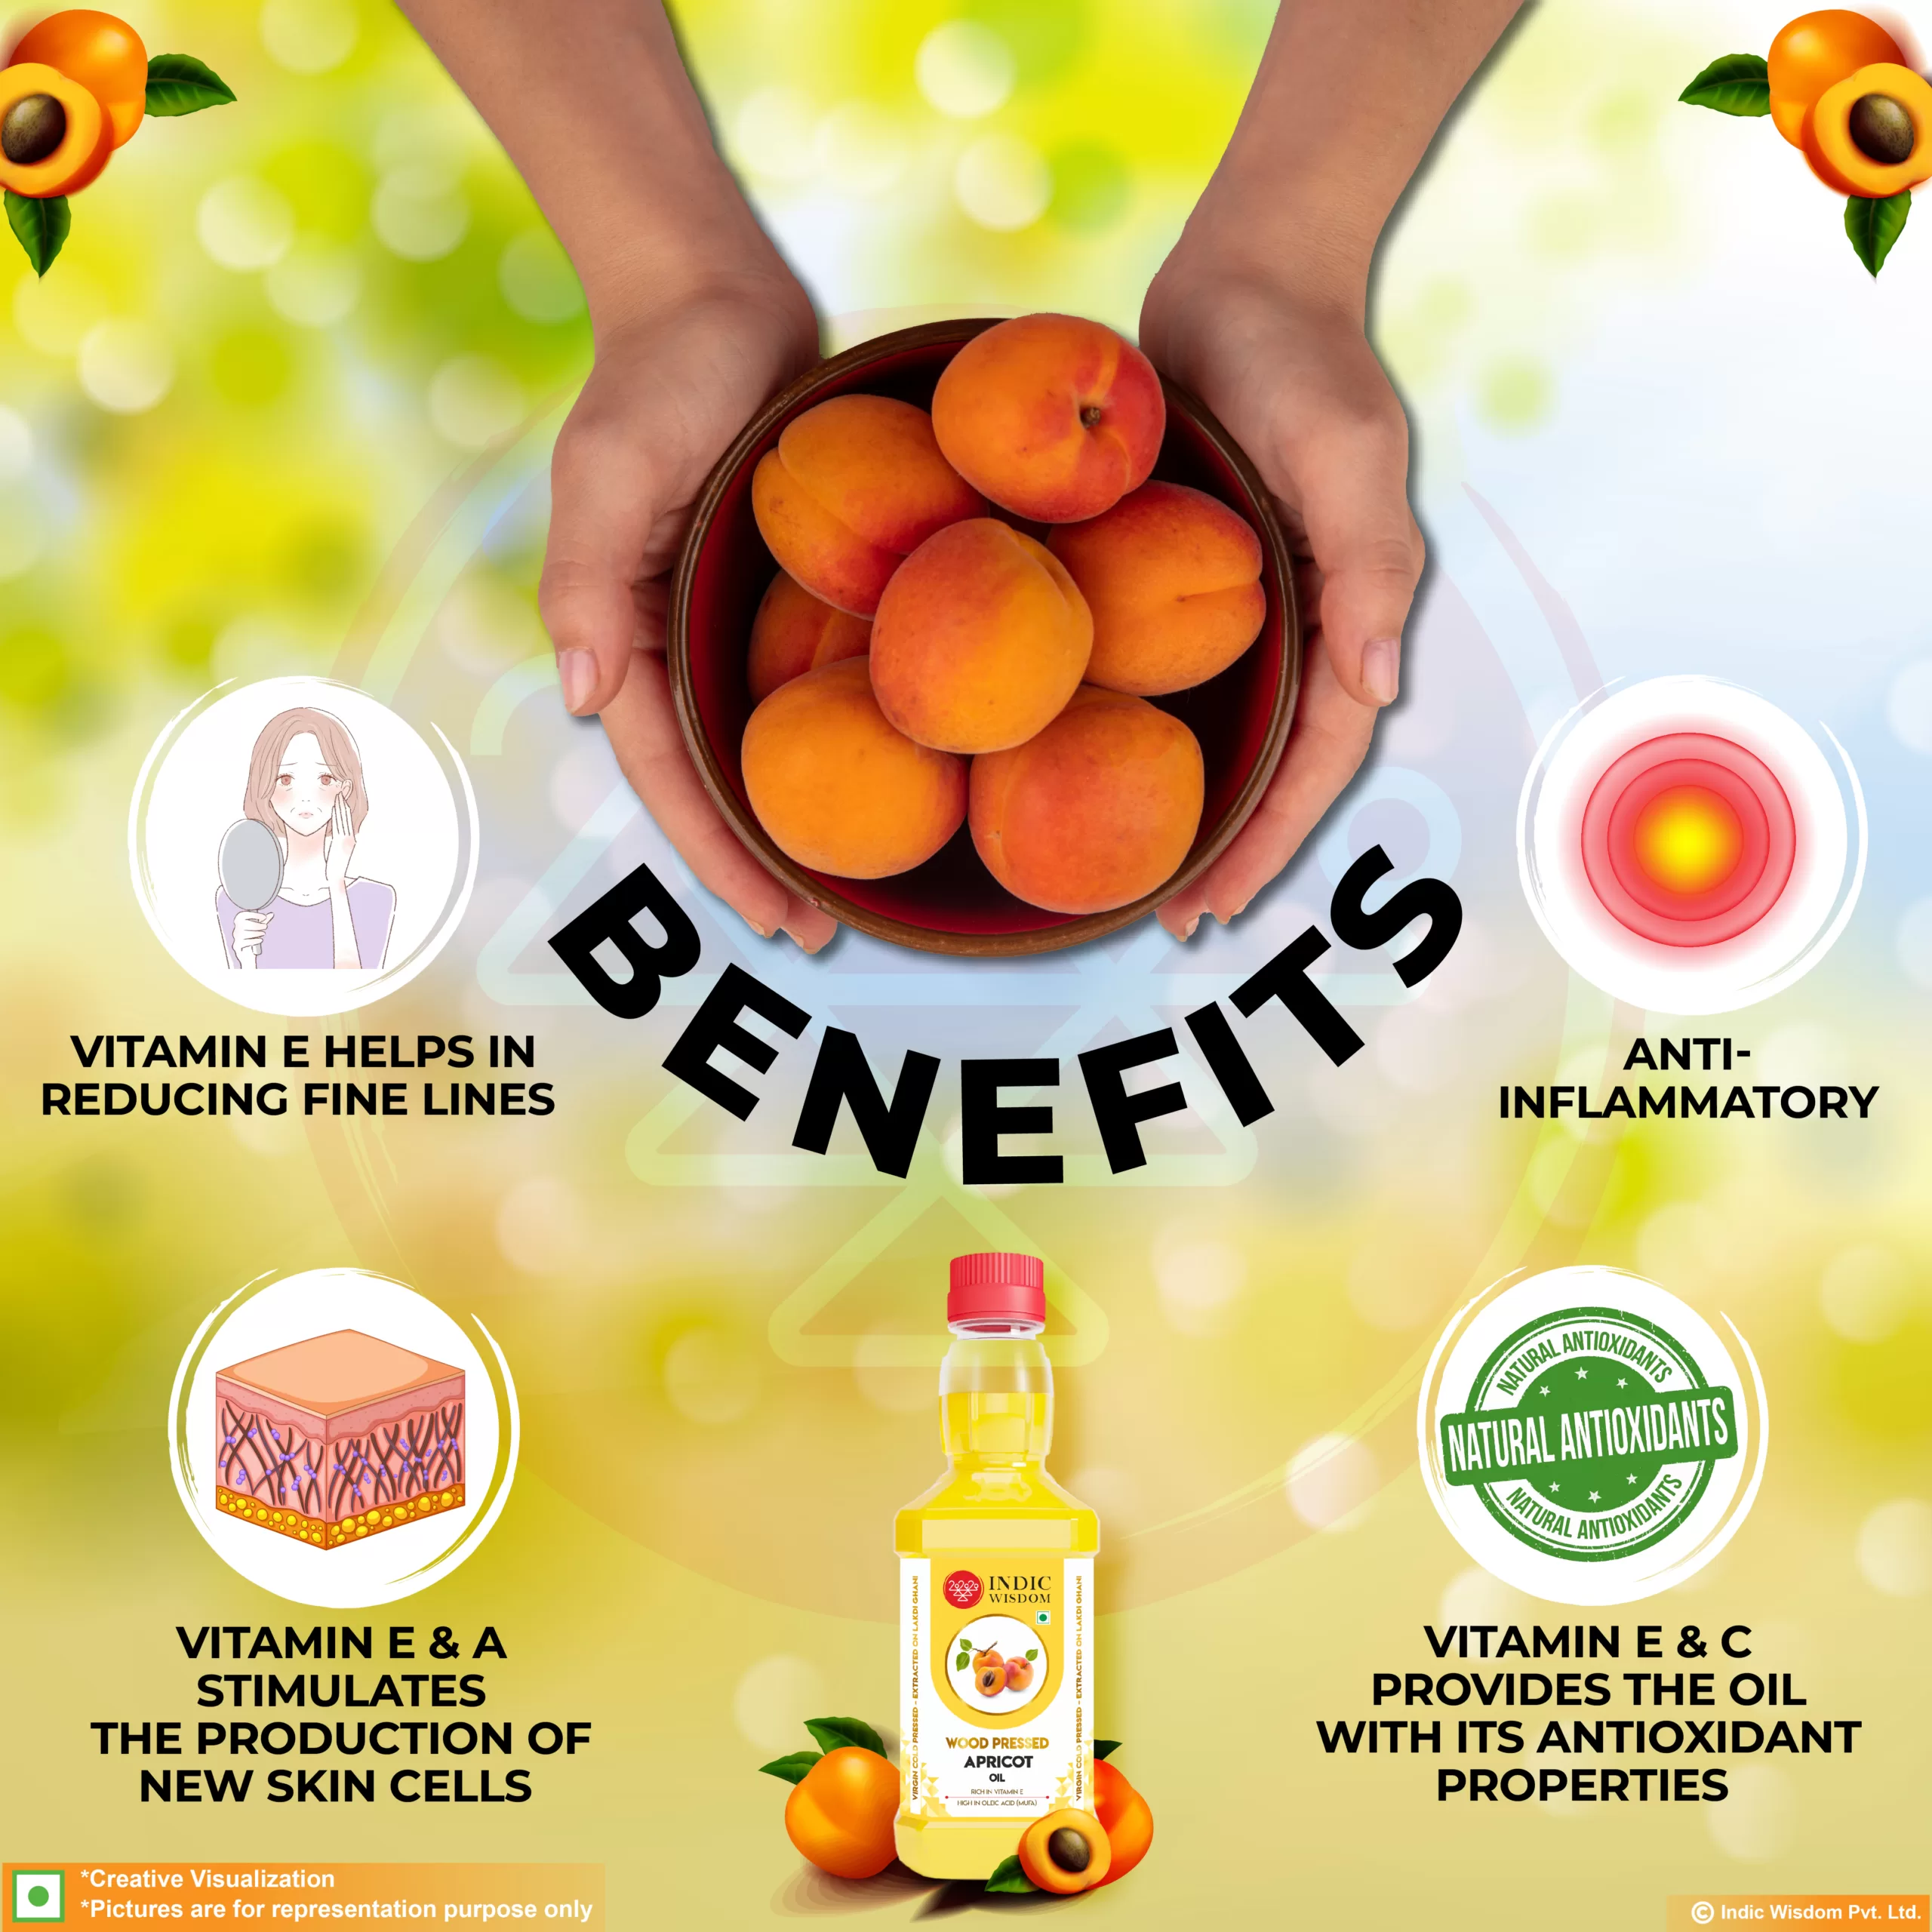 Benefits of wood pressed apricot oil